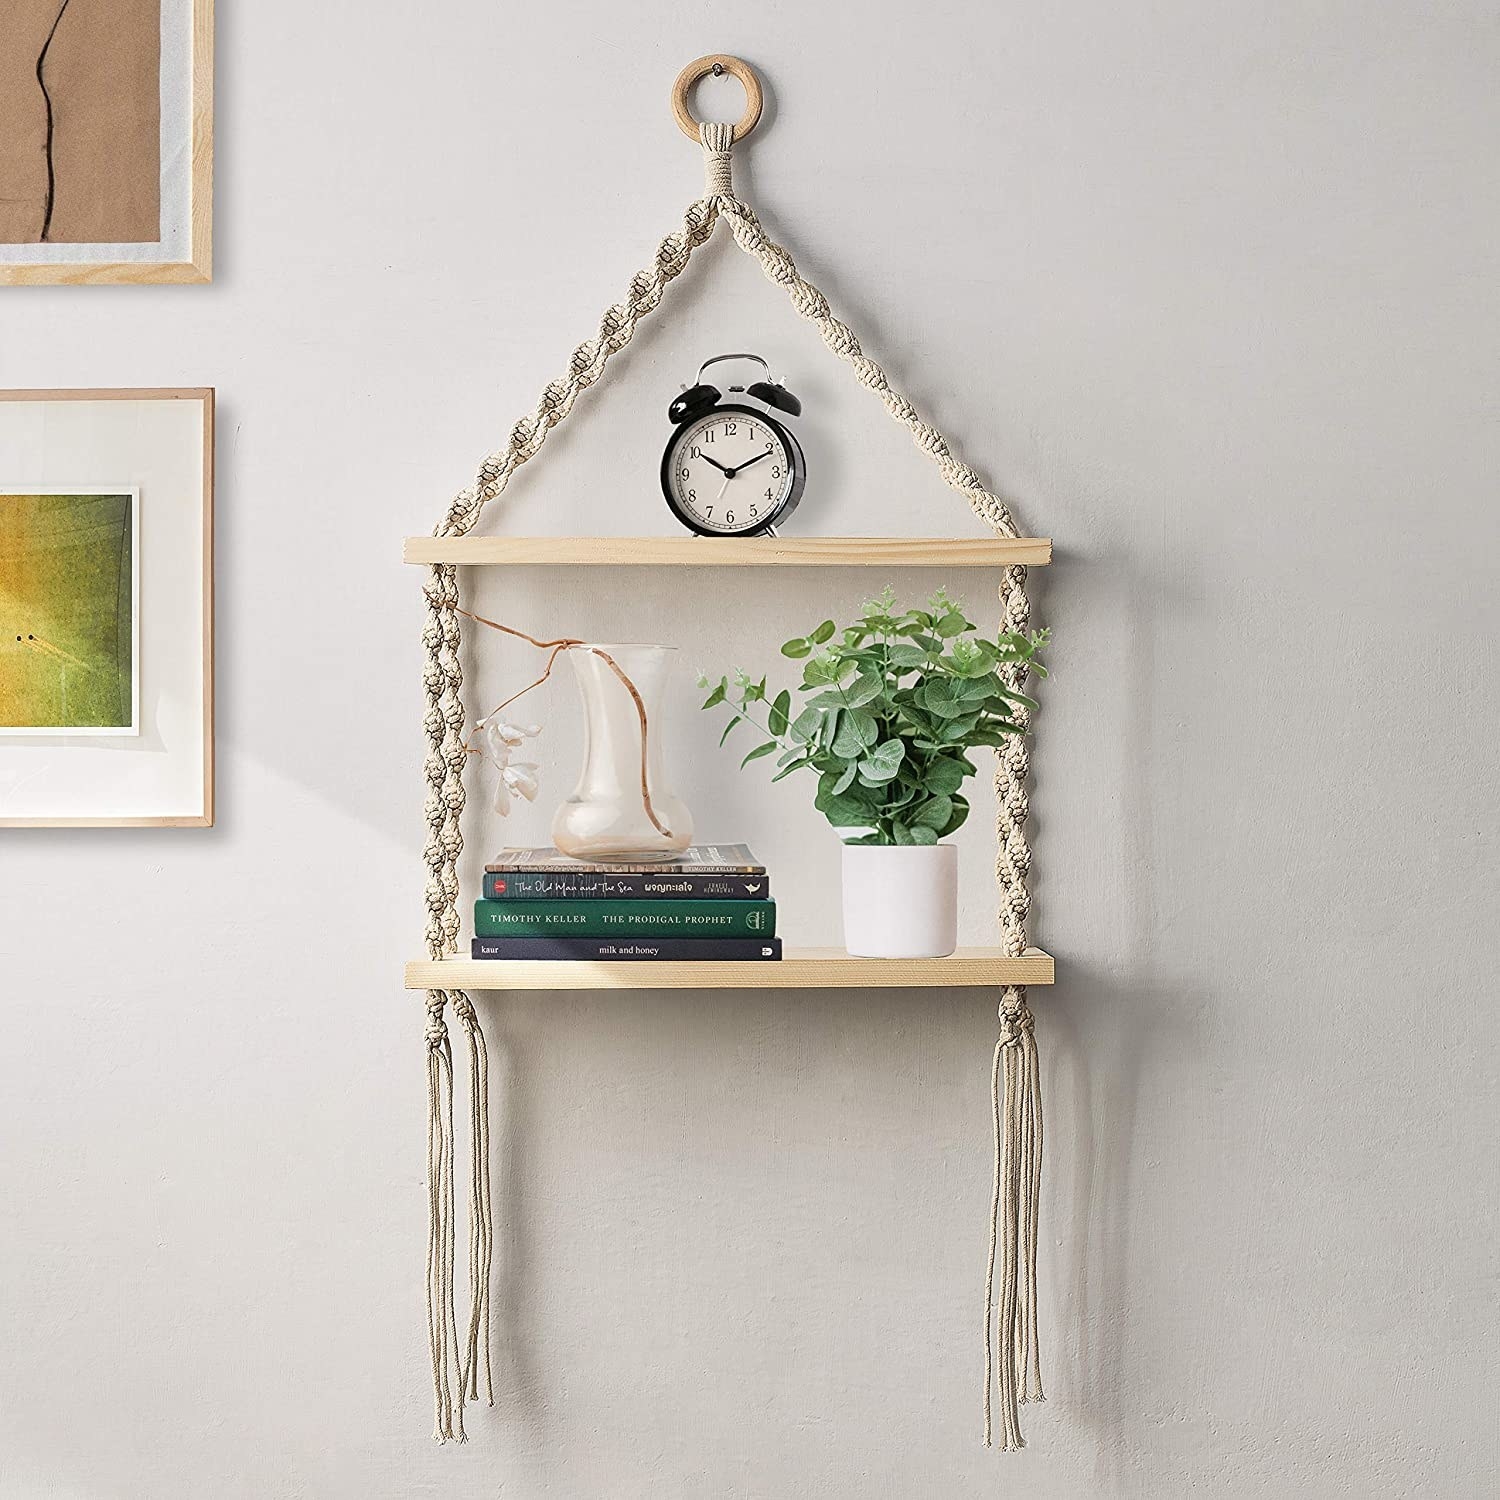 The white macrame wall hanging shelf with books, a potted plant and a clock placed on it